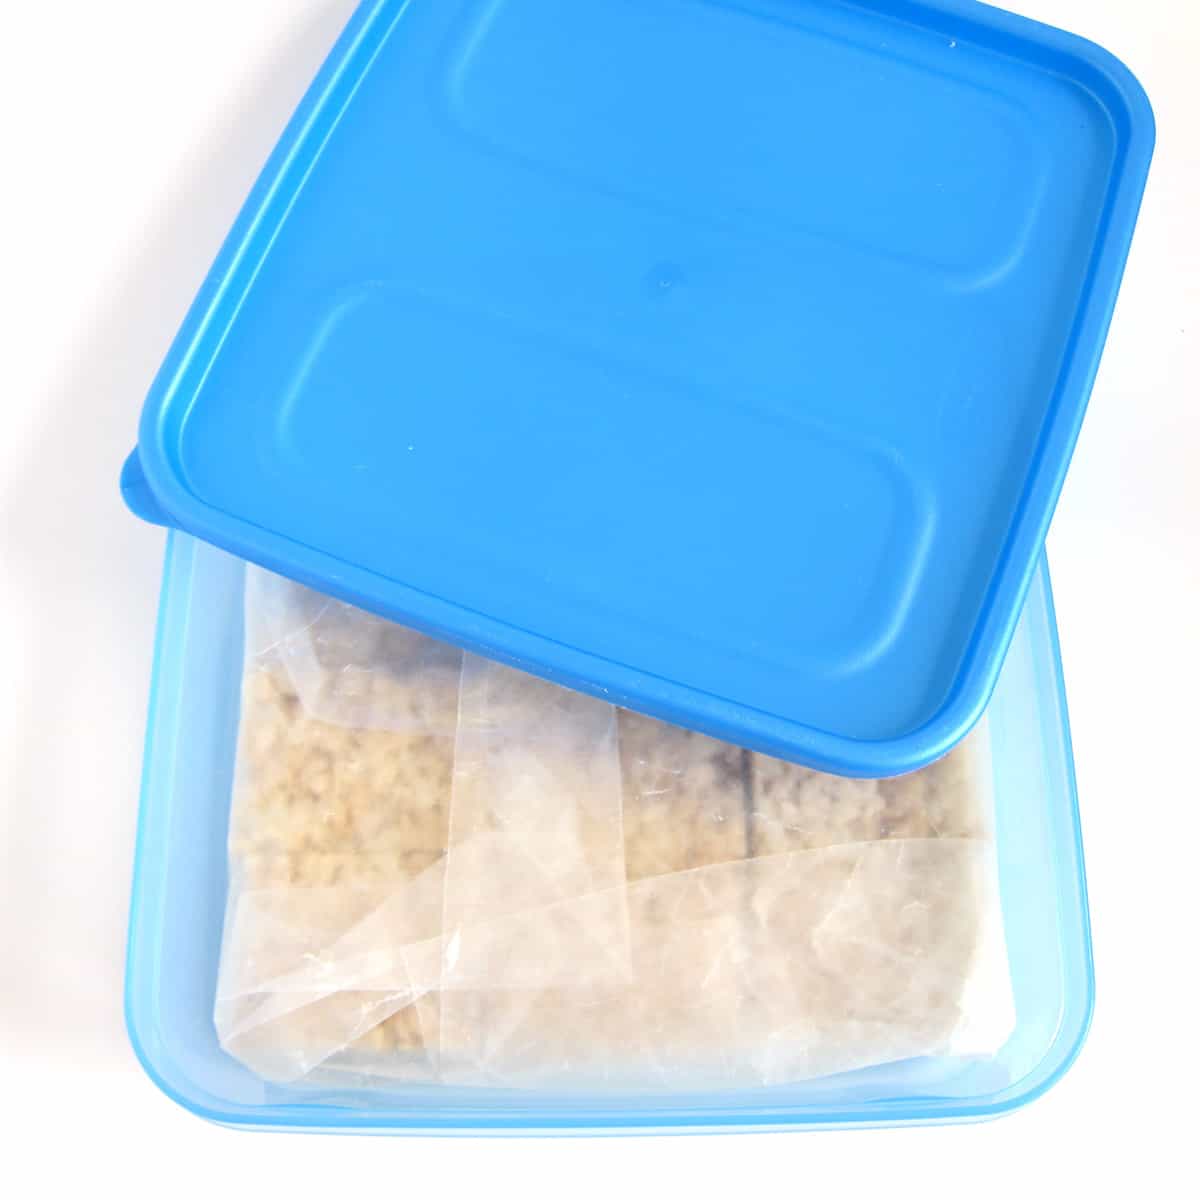 Rice Krispie Treats wrapped in wax paper in a freezer container.